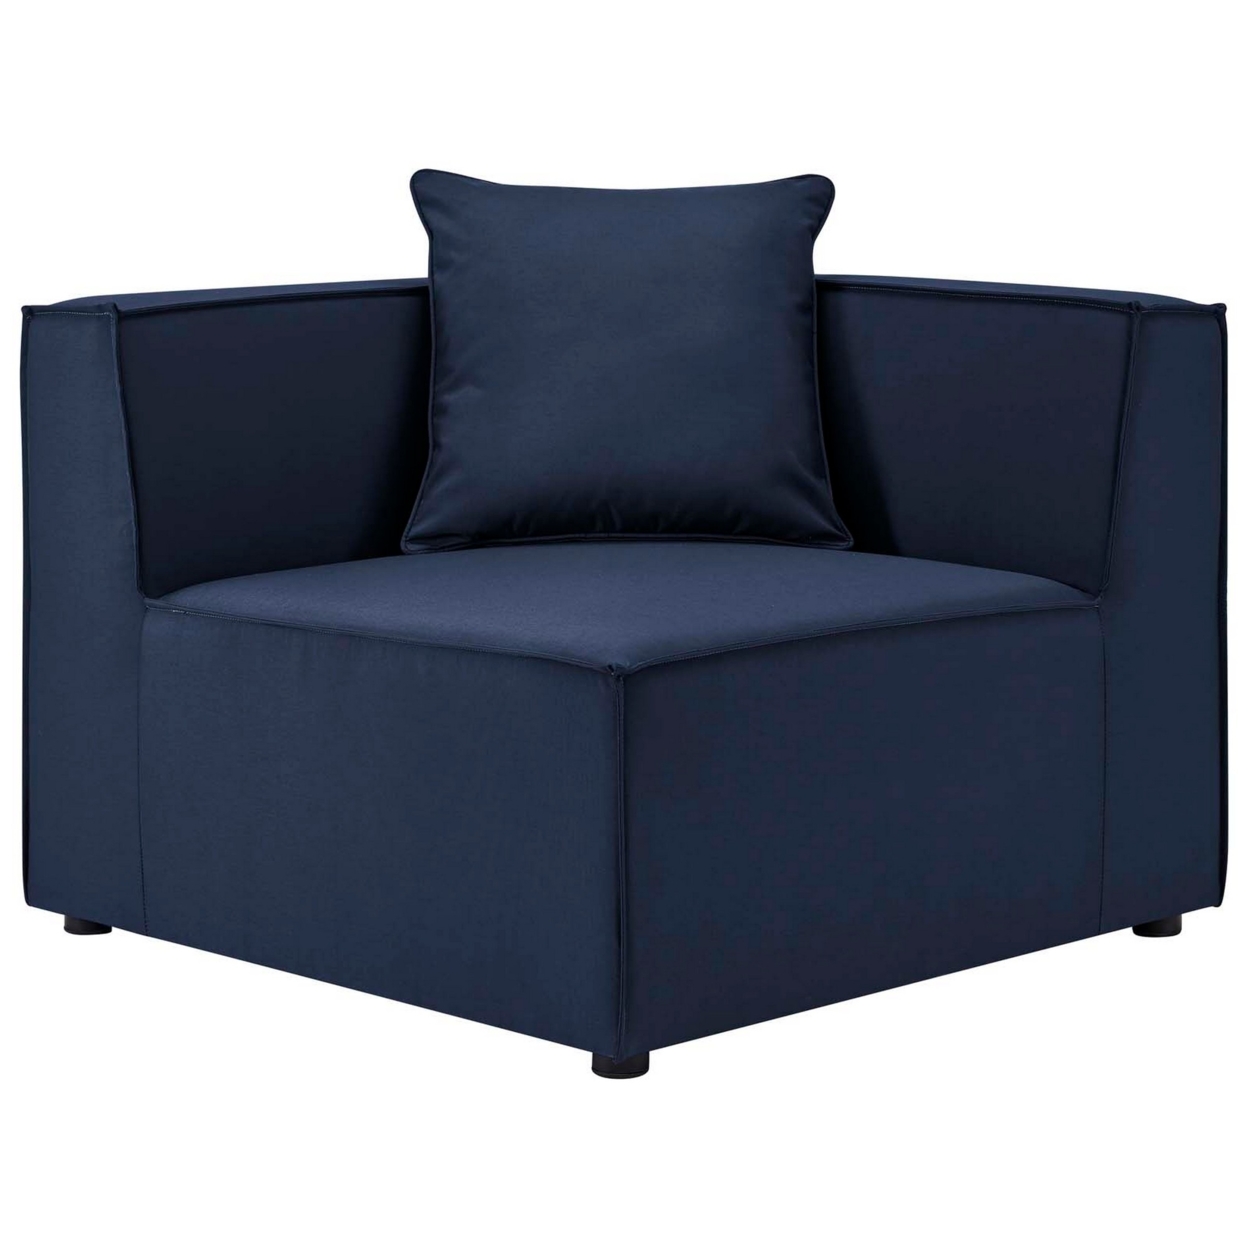 Saybrook Outdoor Patio Upholstered Sectional Sofa Corner Chair, Navy